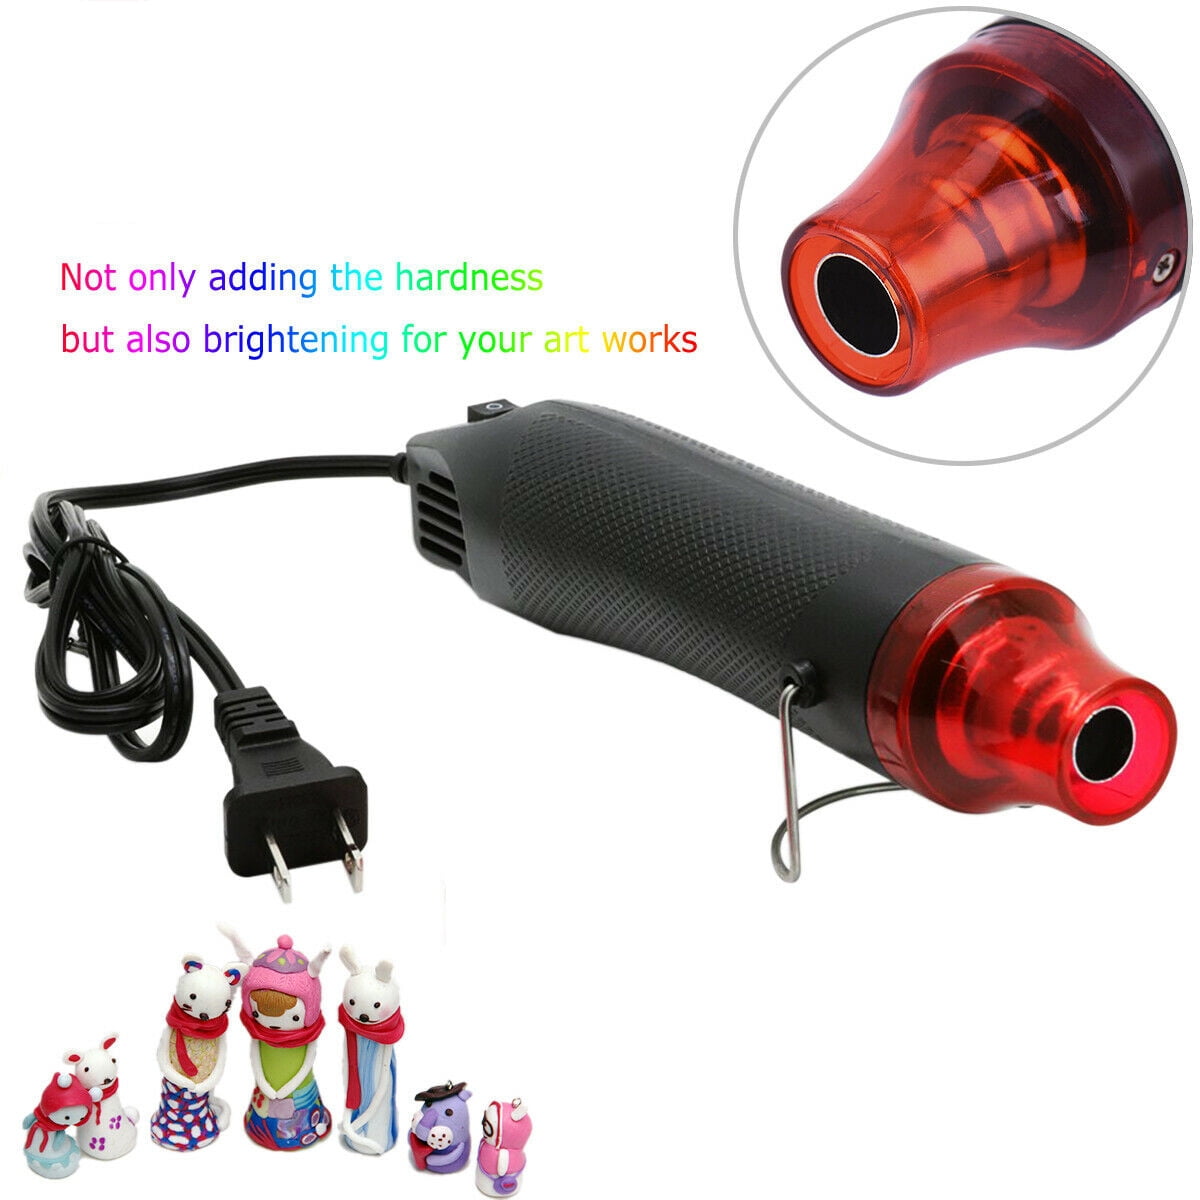 300 W Multi Hand-hold Heat Tools. Embossing Soft Rubber Stamp Shrink Wrapping Tubing PVC DIY Mini Heat Gun,for Epoxy Resin Crafts,Portable Hot Air Electrical Heat Tool for Embossing 